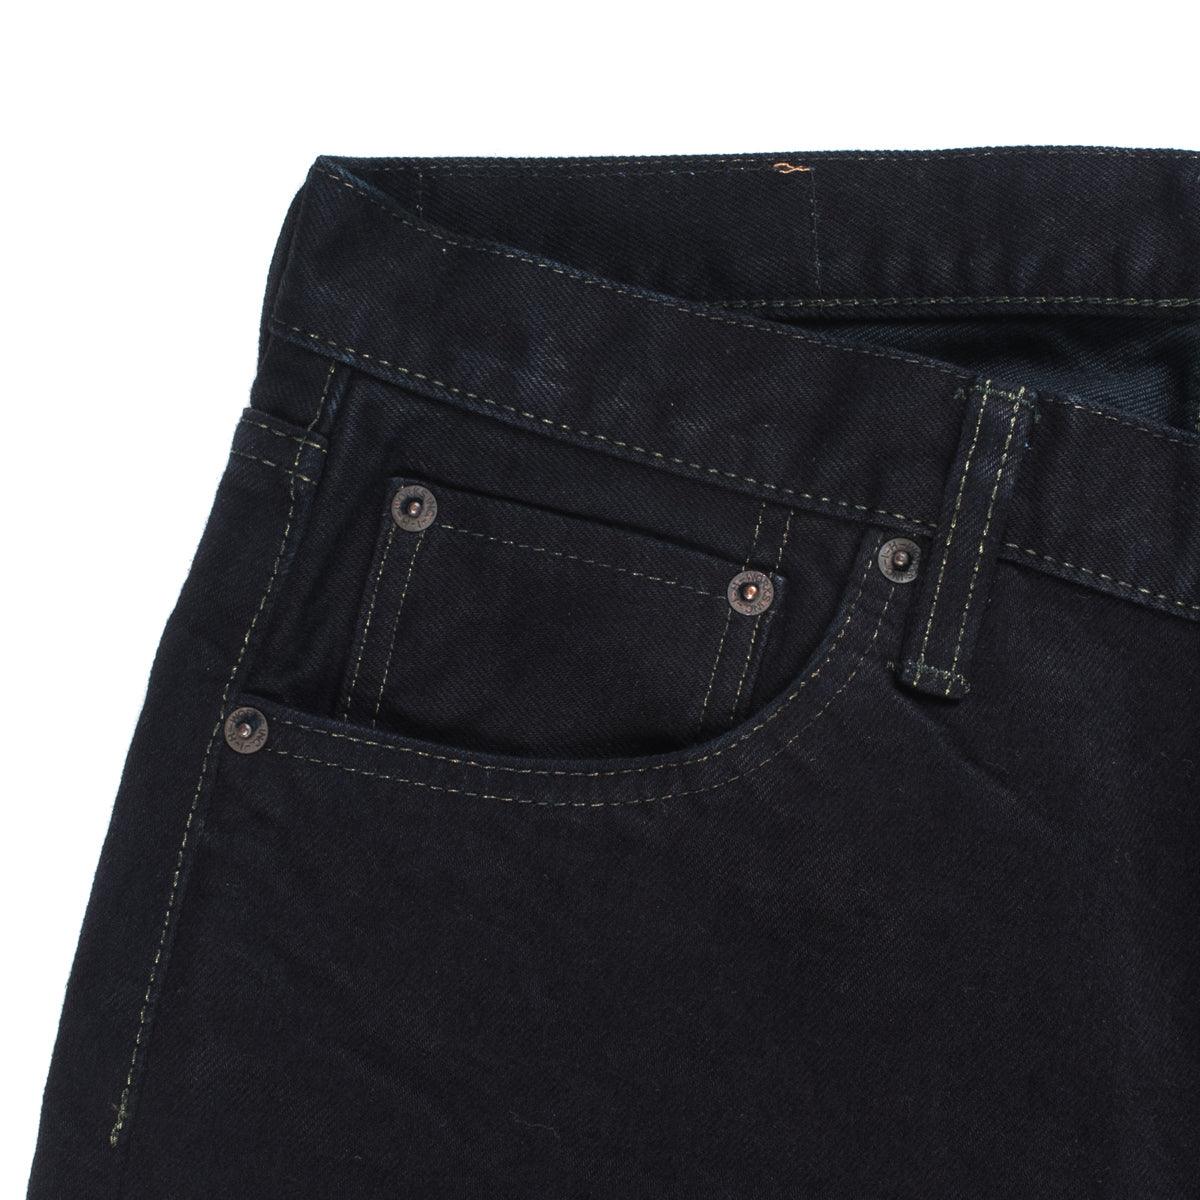 Image showing the IH-666S-142od - 14oz Selvedge Denim Slim Straight Cut Jeans Indigo Overdyed Black which is a Jeans described by the following info 666, Bottoms, Iron Heart, Jeans, Released, Slim, Straight and sold on the IRON HEART GERMANY online store